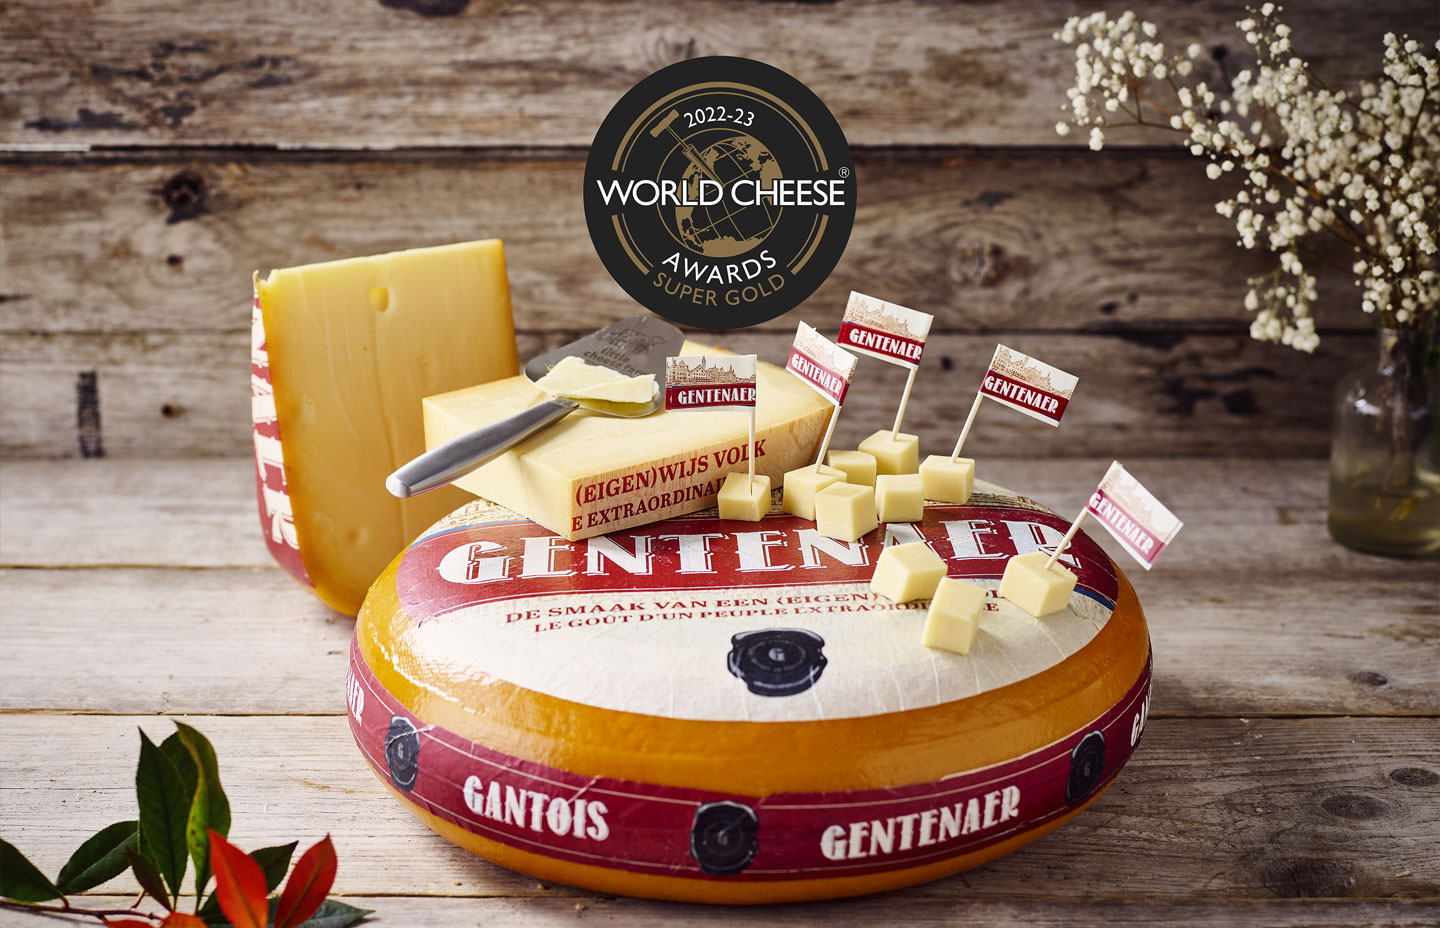 World Cheese Awards 2022 2023 In Wales Uk Little Cheese Farm 